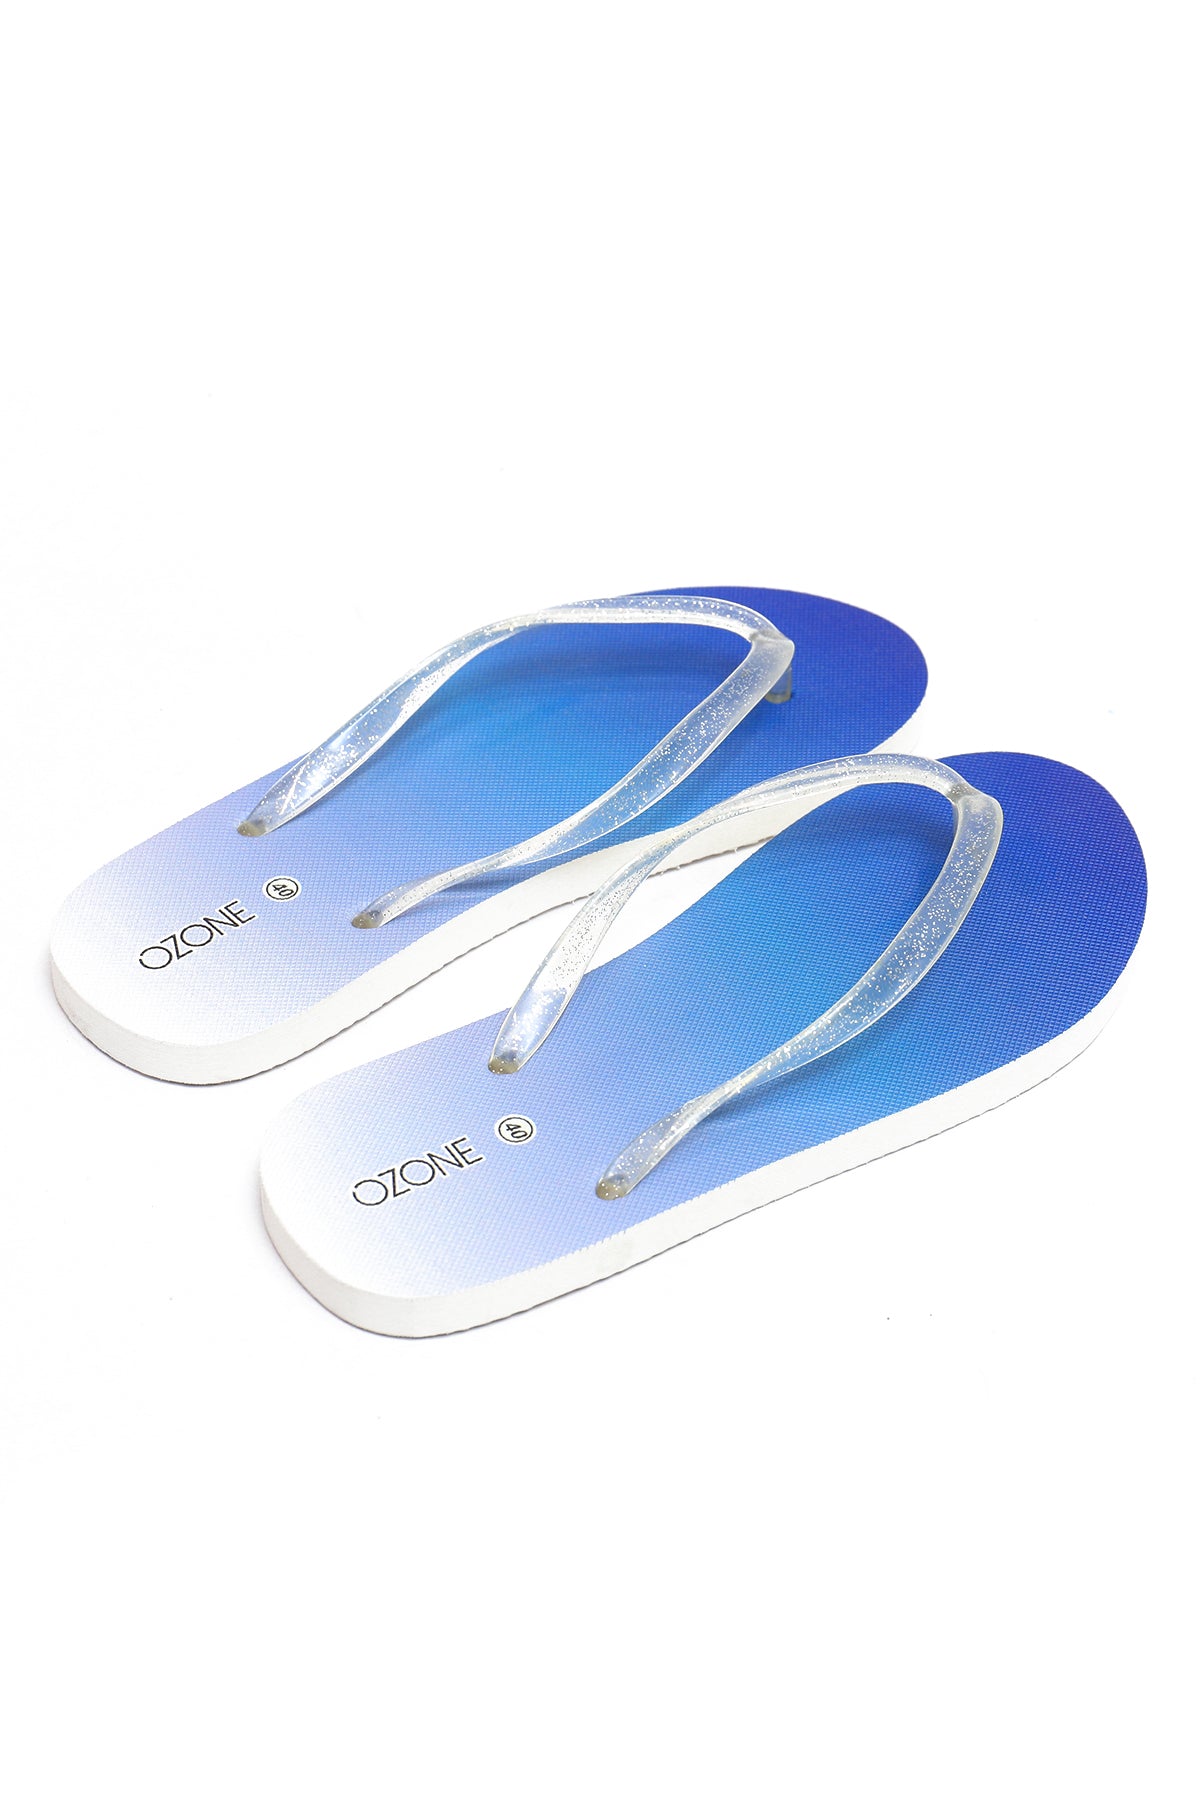 Womens Rubber Slippers